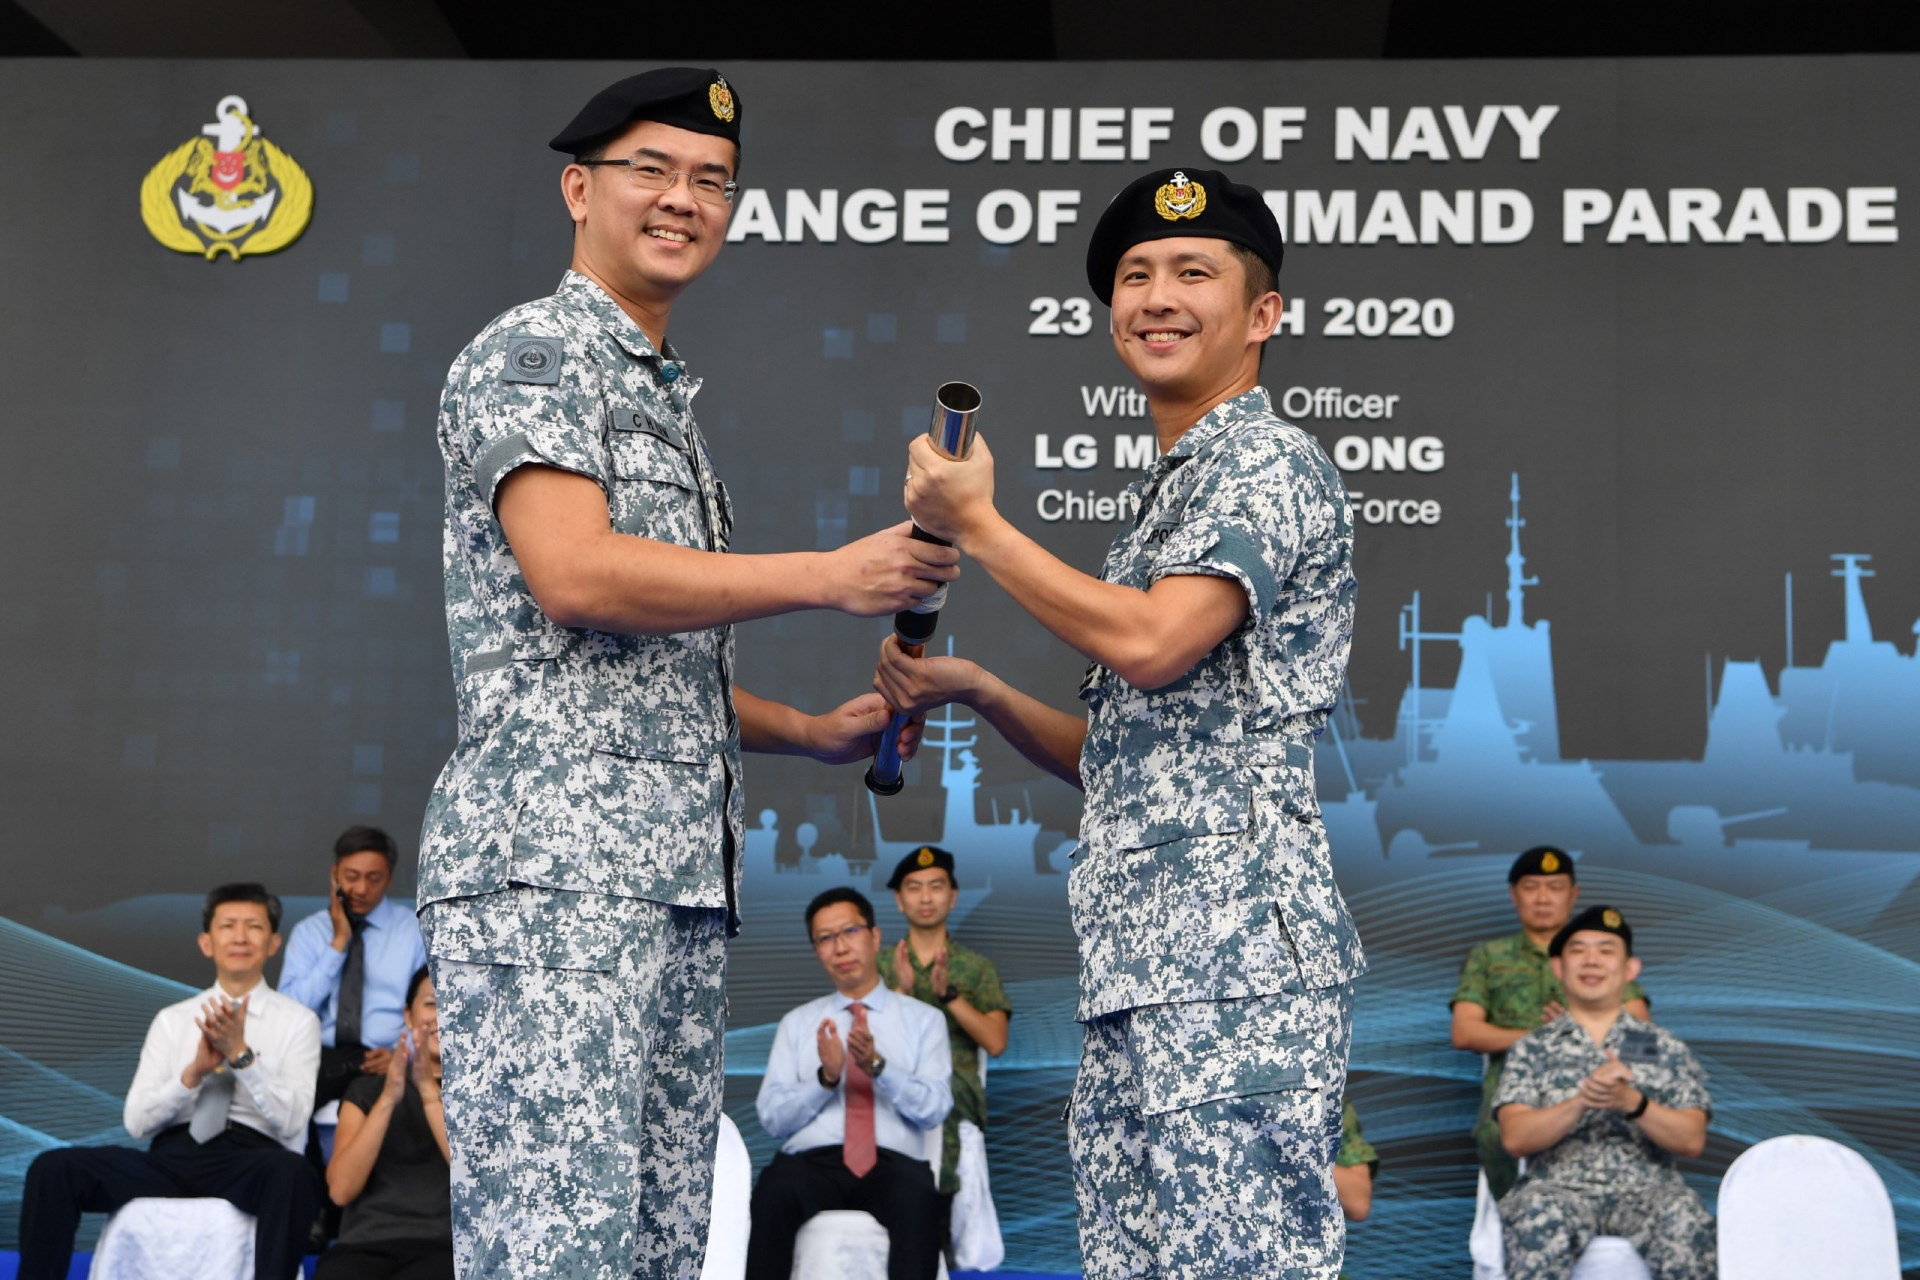 Outgoing Chief of Navy, RADM Lew (left), handing over the command symbol to incoming Chief of Navy, RADM Aaron Beng (right).